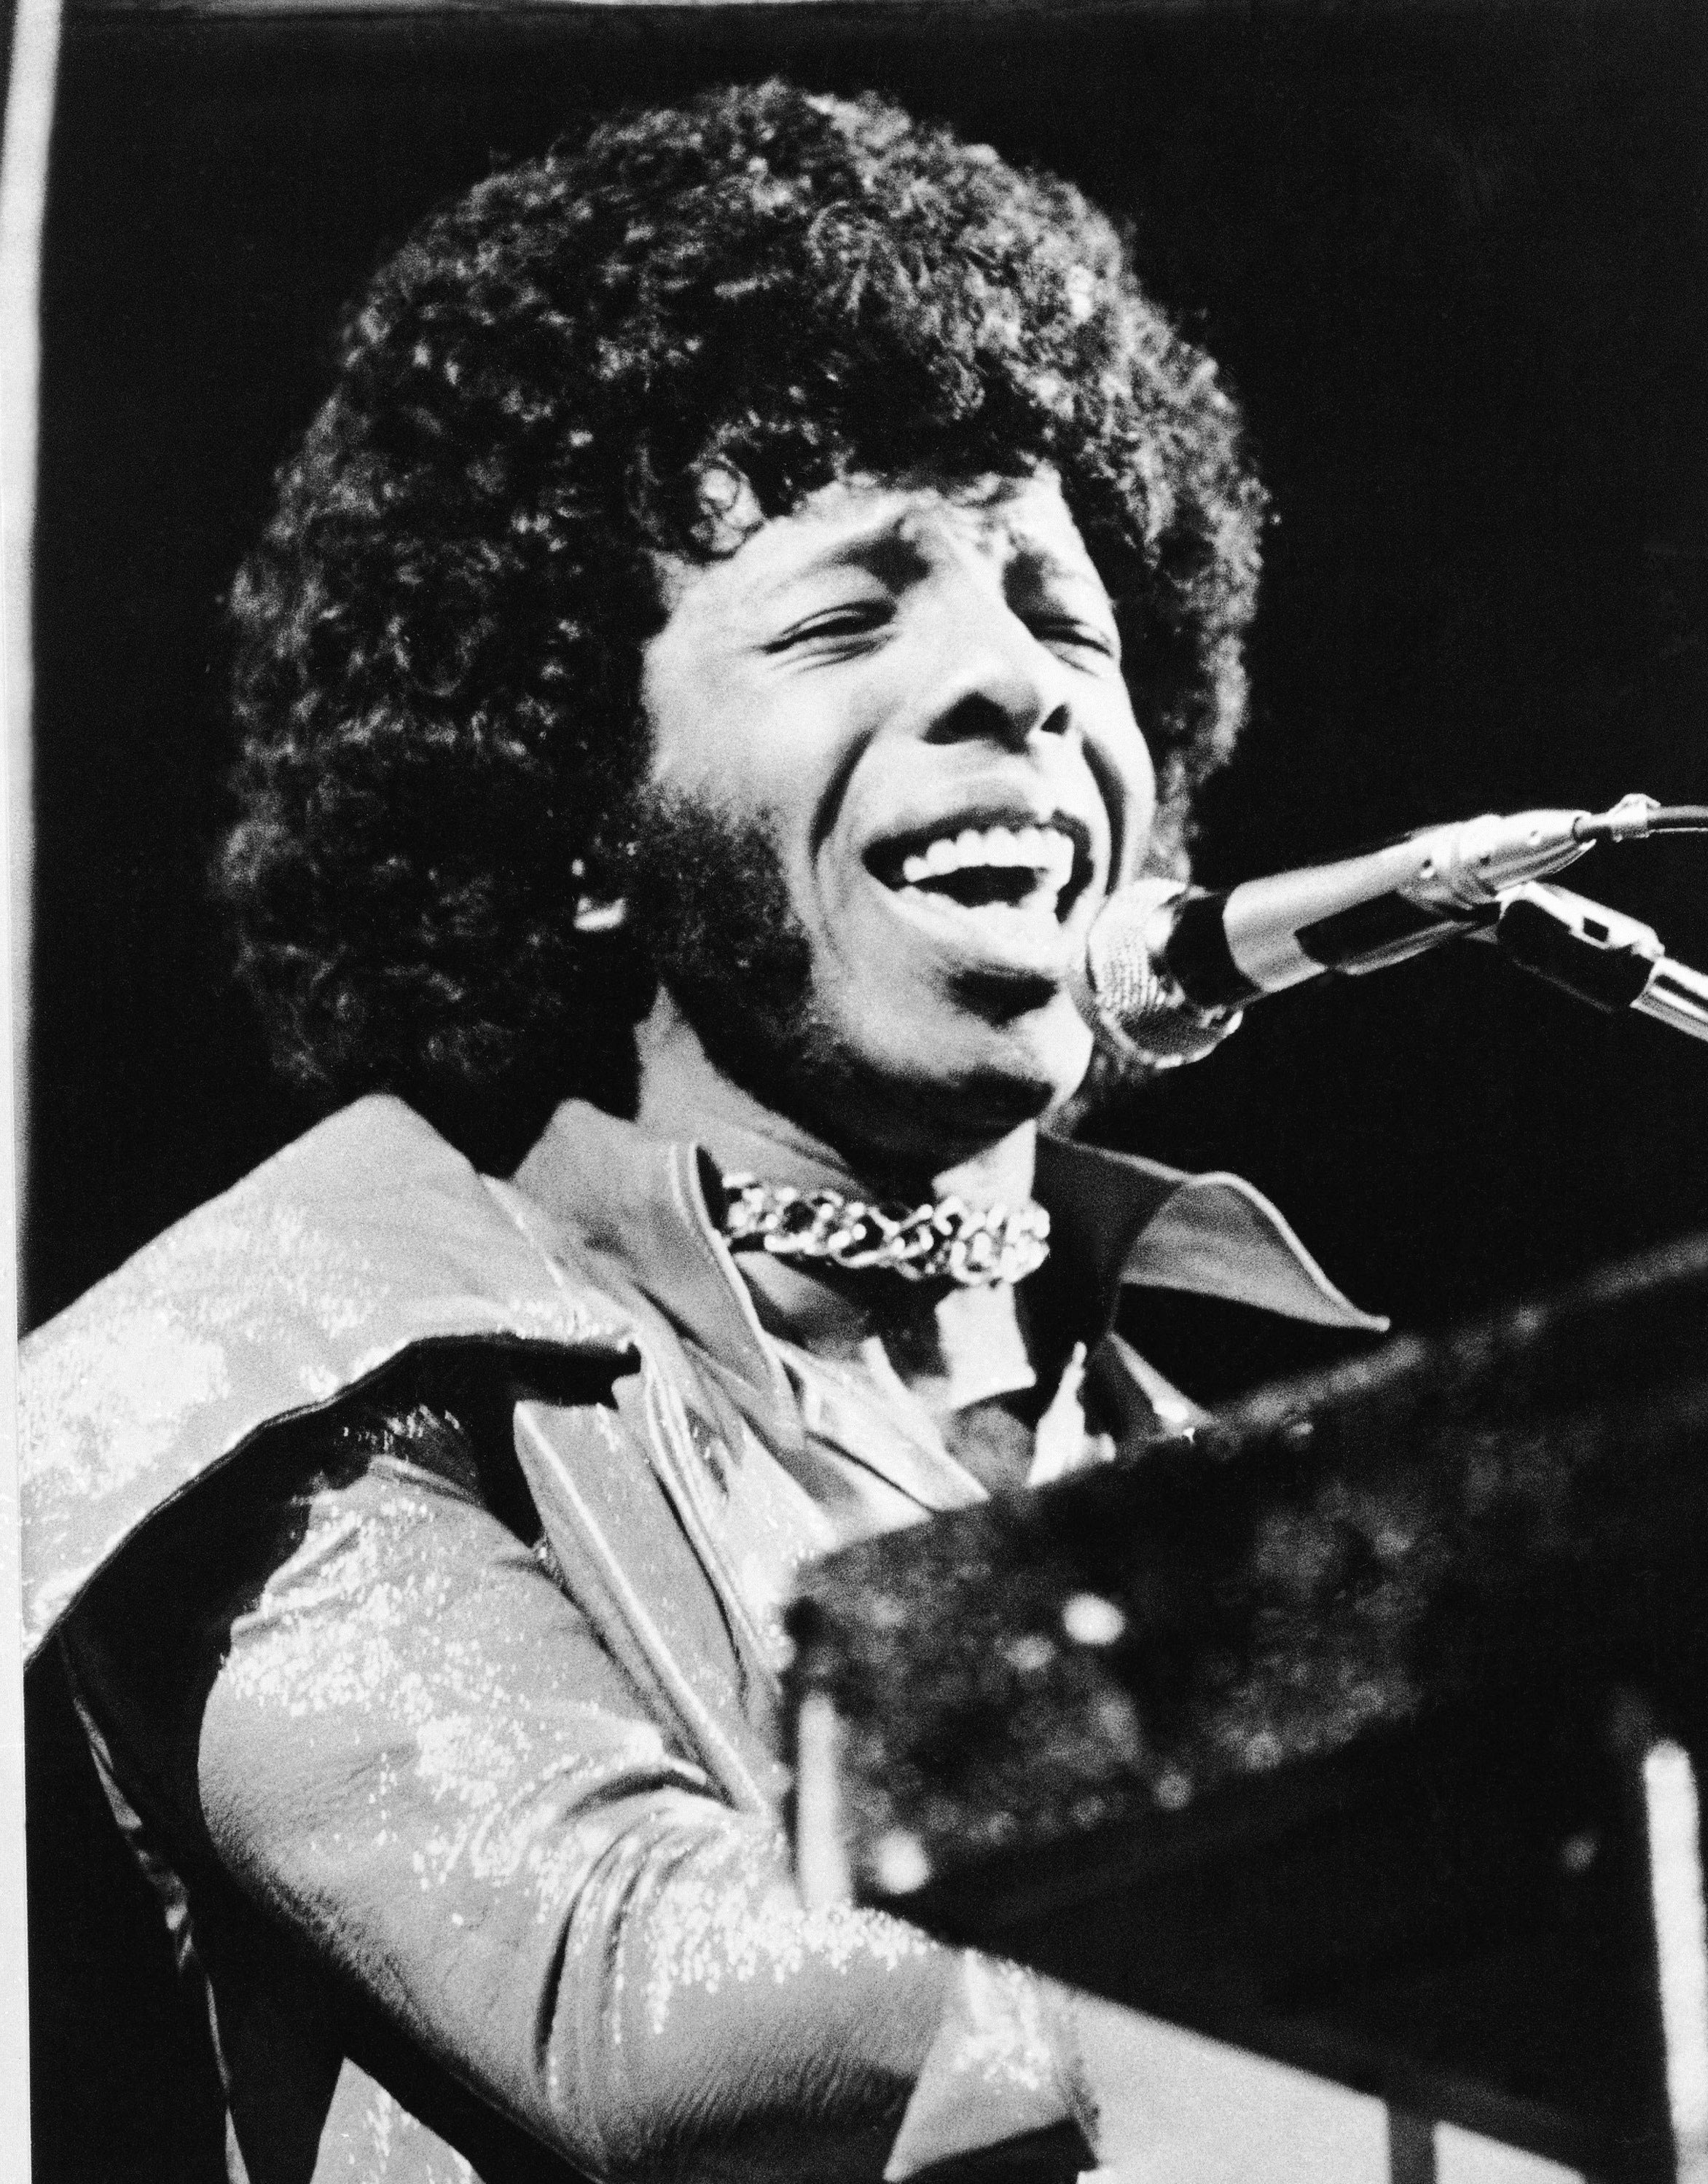 Sly Stone book to be released through new Questlove imprint | The ...